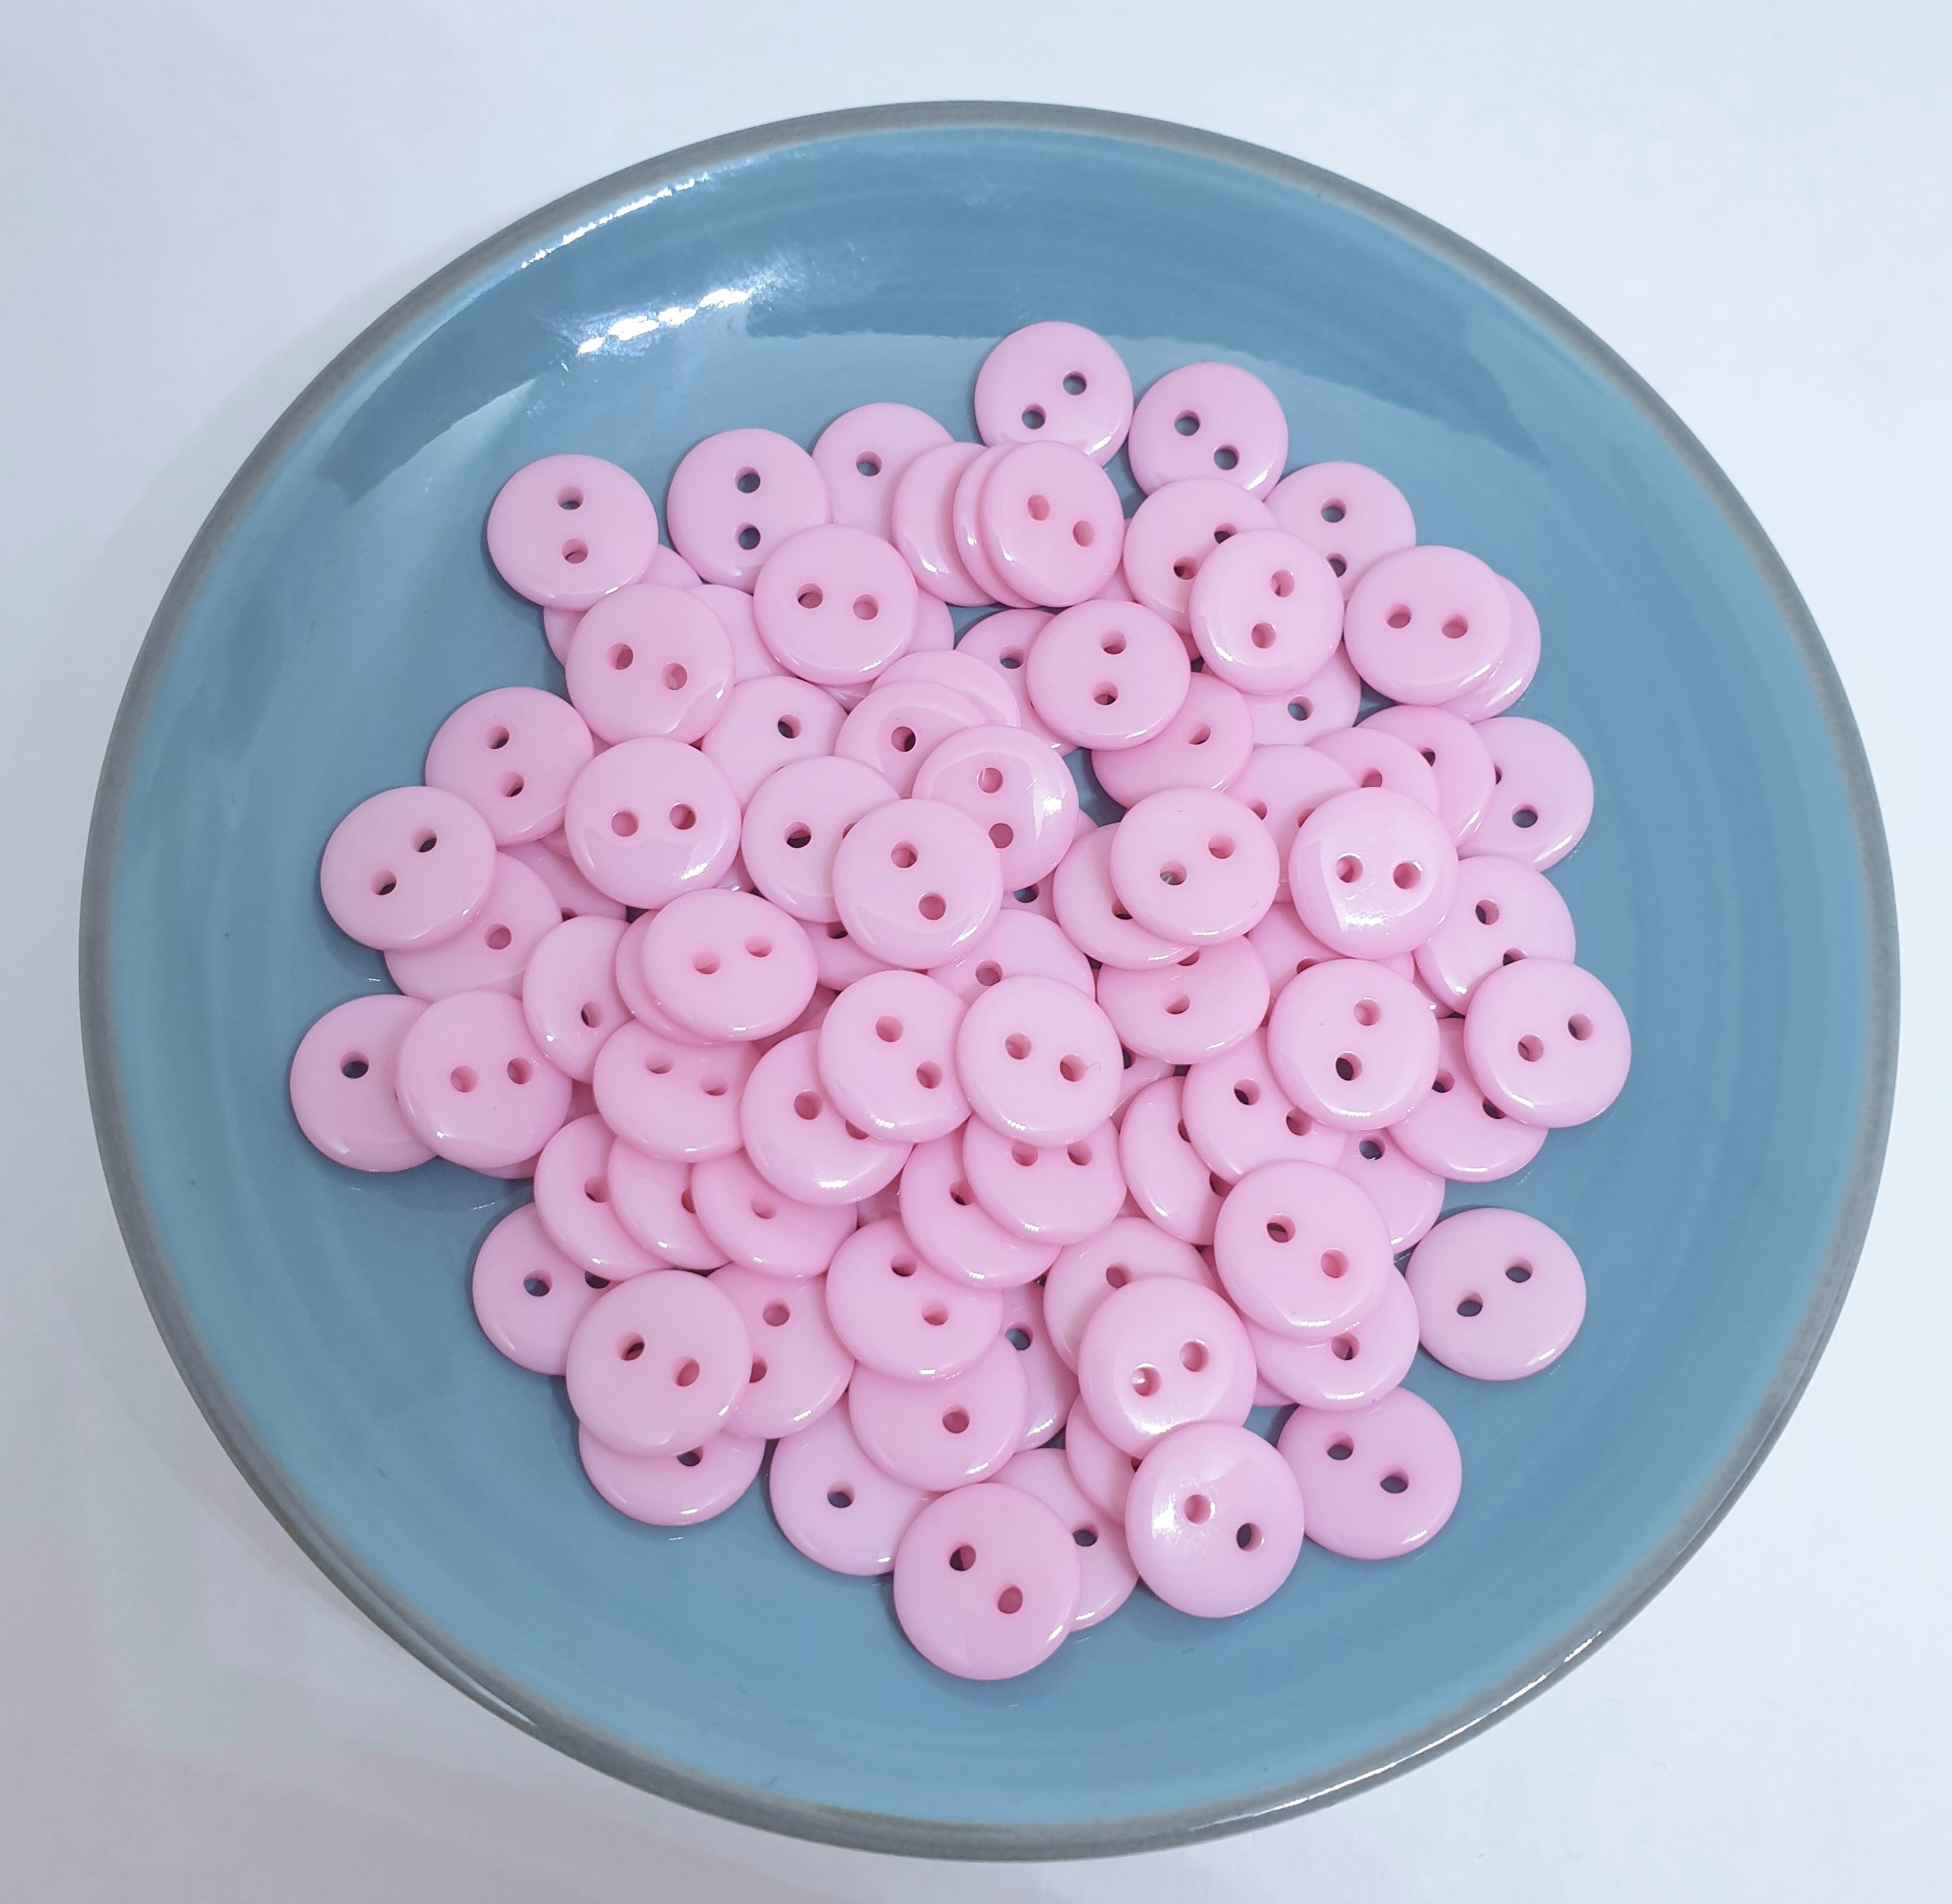 MajorCrafts 120pcs 10mm Light Pink 2 Holes Small Round Resin Sewing Buttons B03